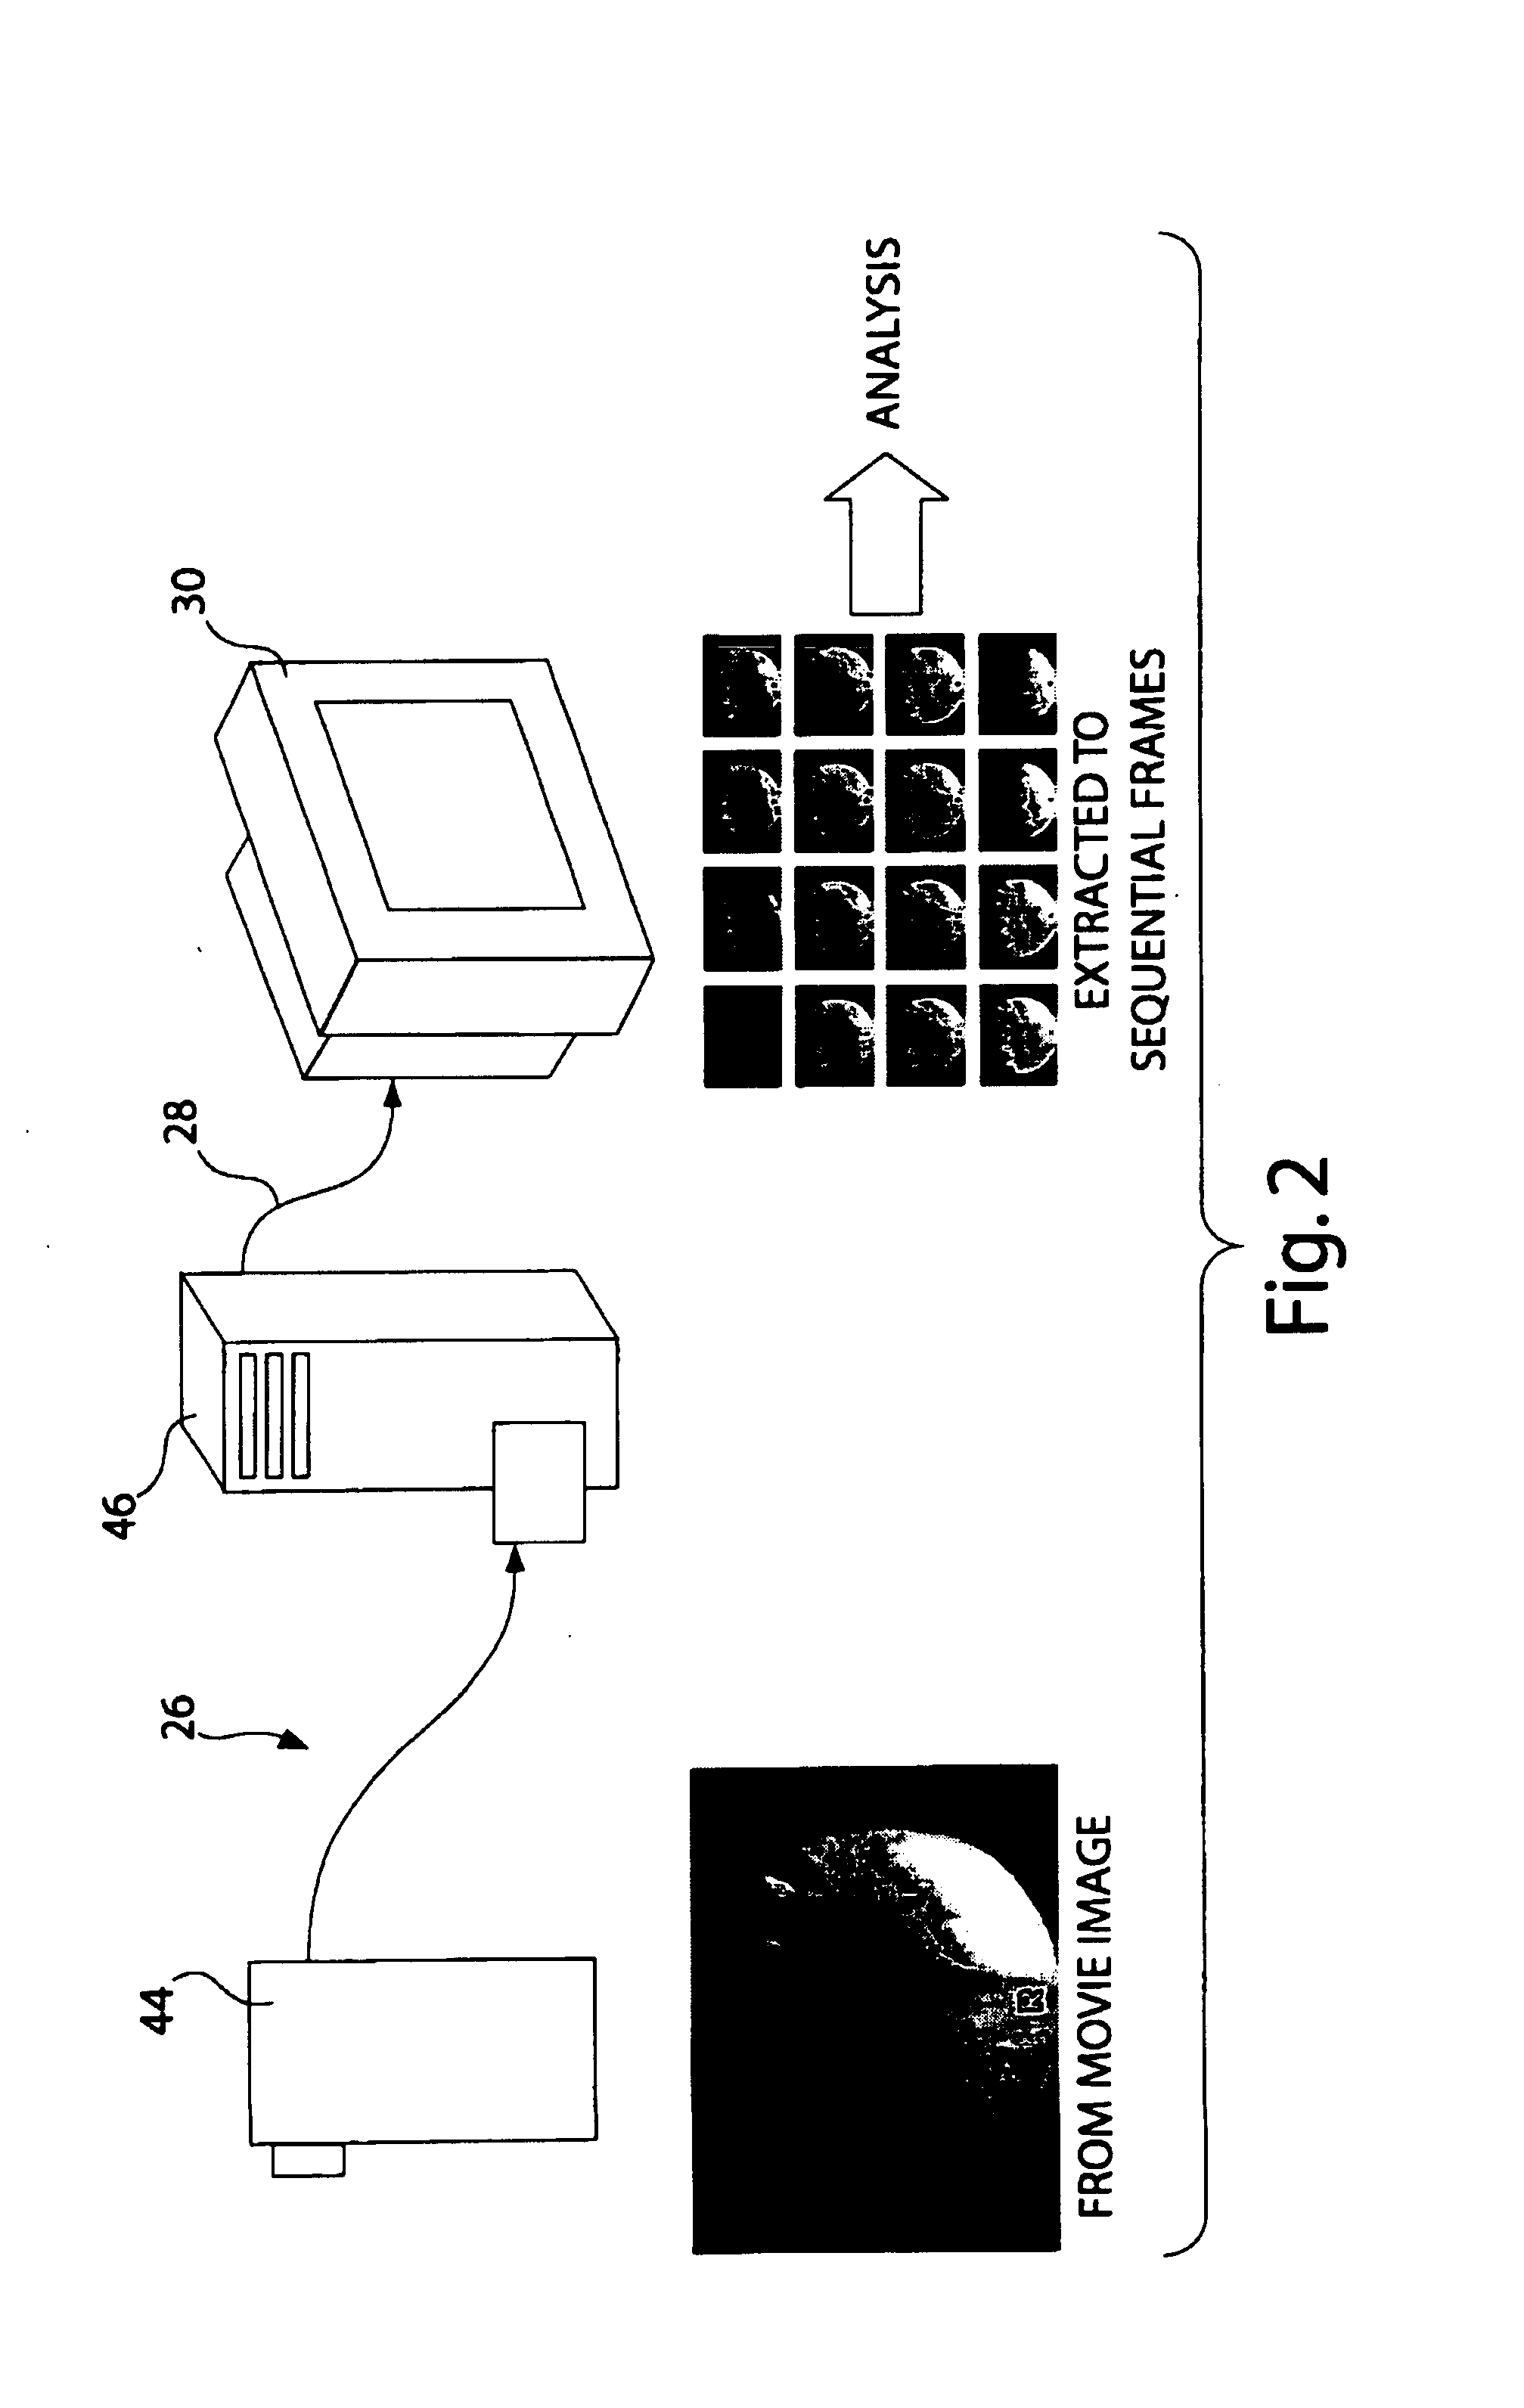 Apparatus and method for the kinetic analysis of tear stability